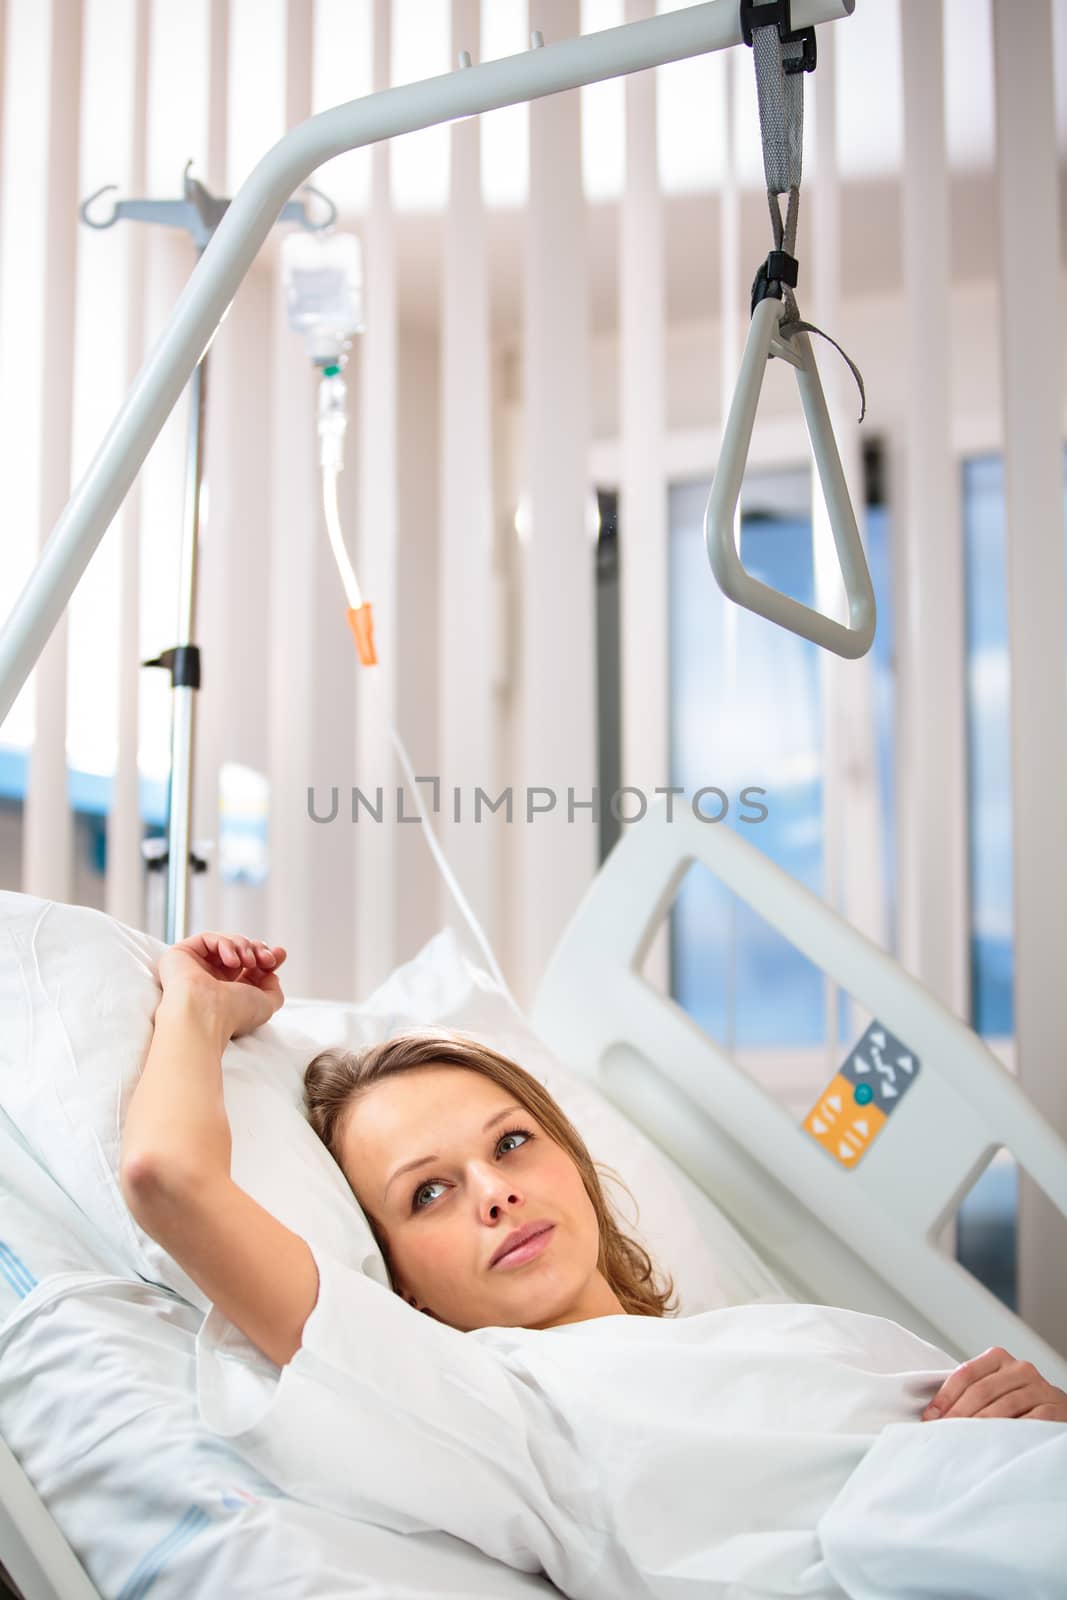 Pretty, young, female patient in a modern hospital room.